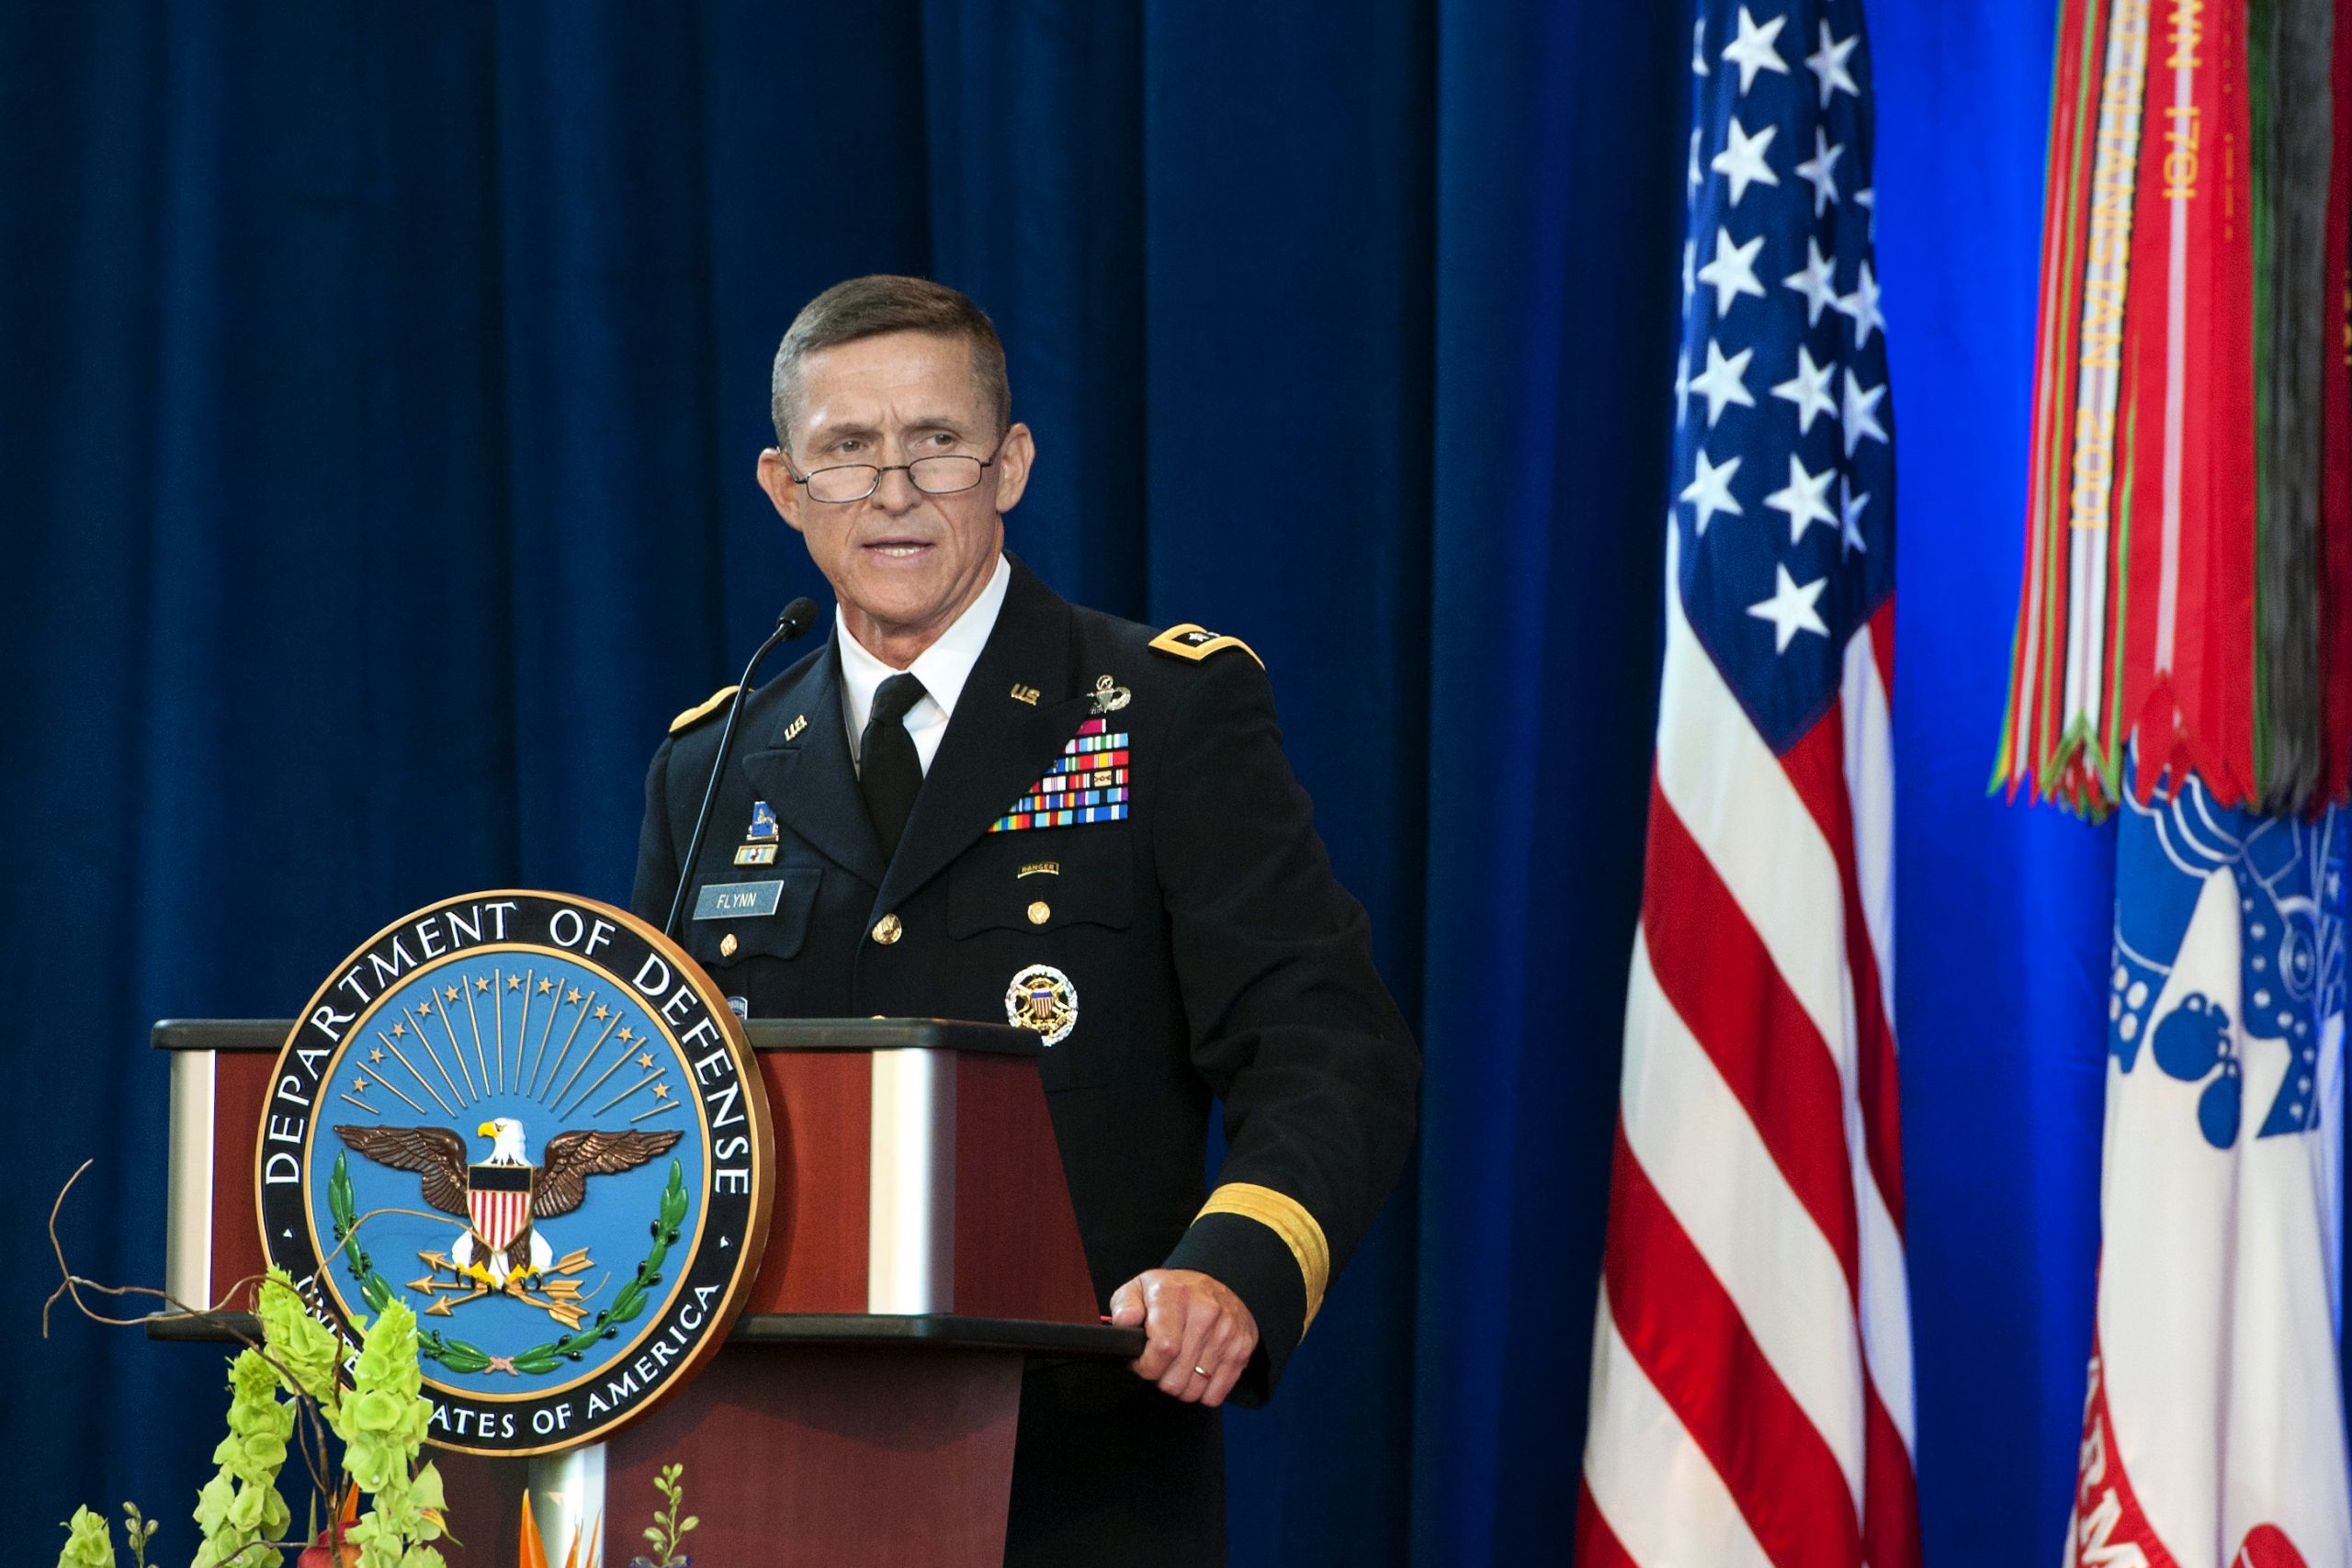 Appeals Court Rejects Flynn’s Case Dismissal Request